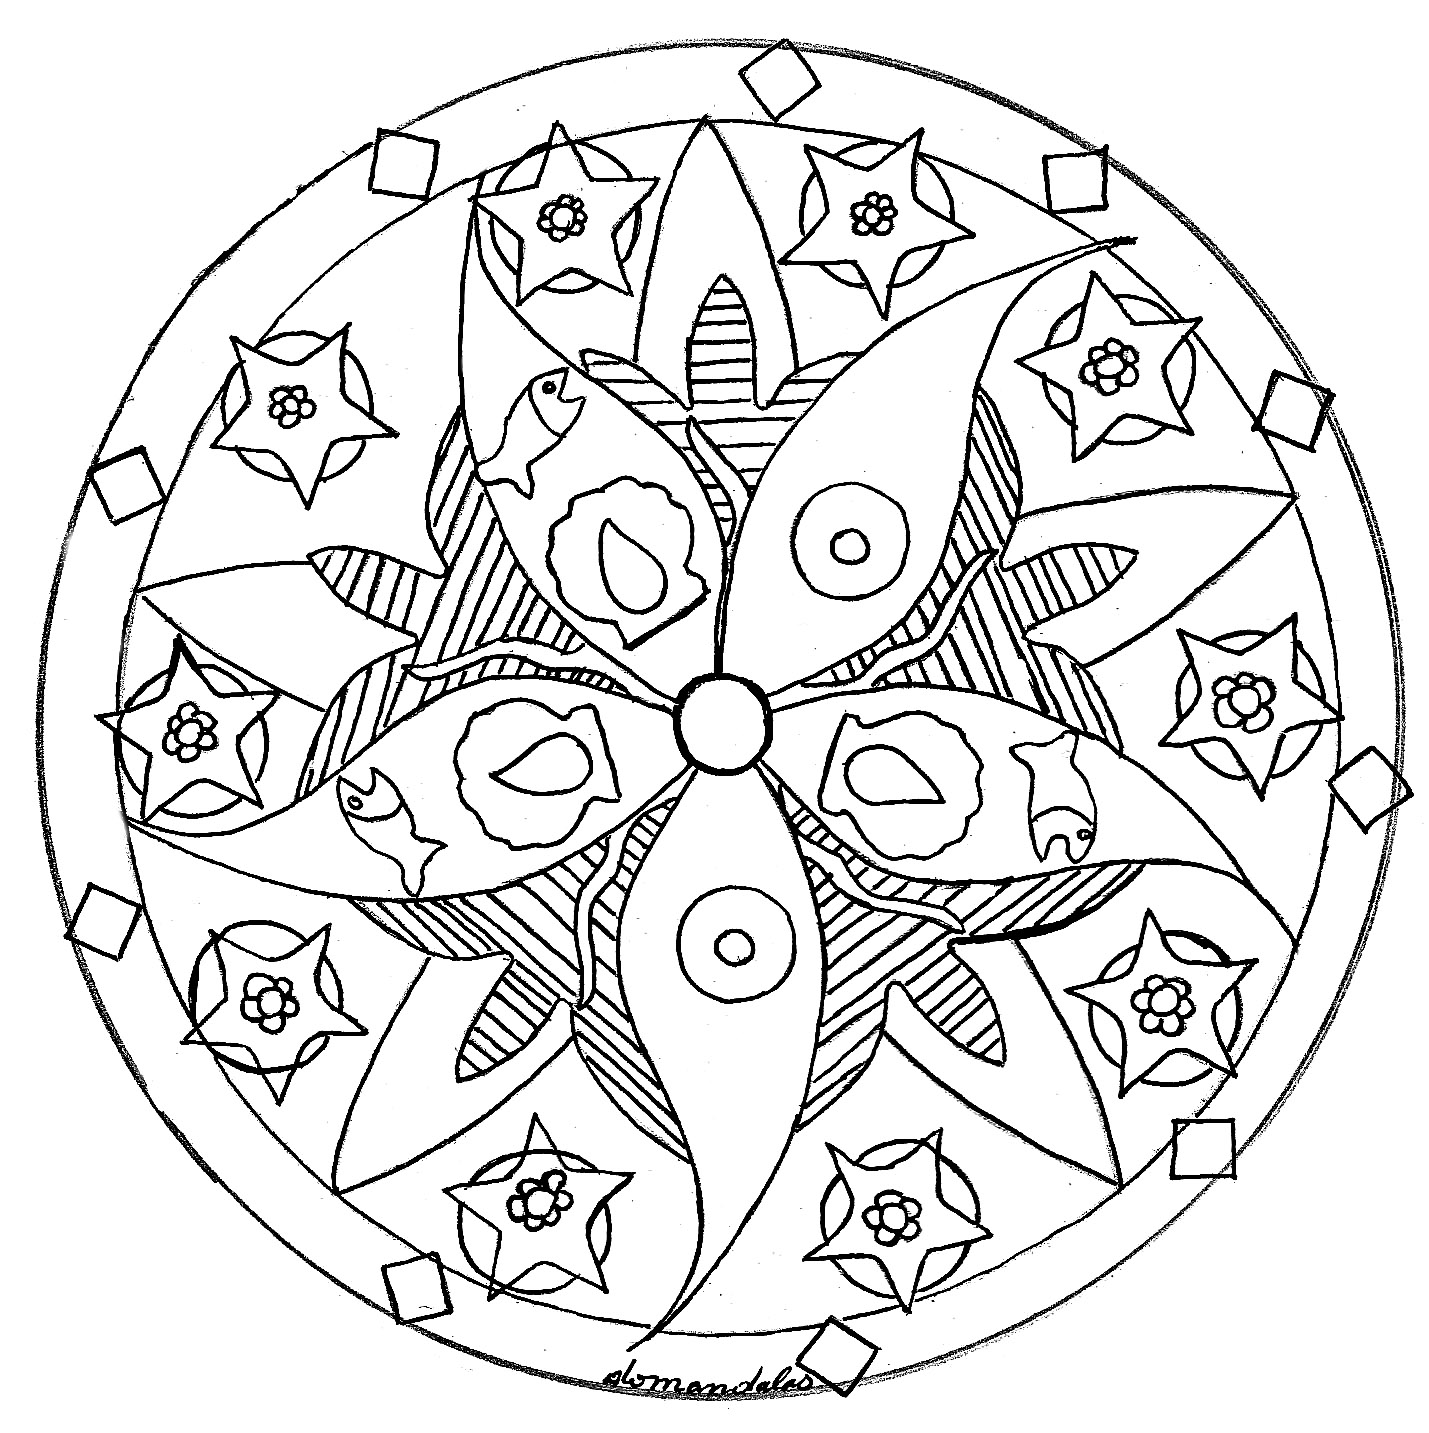 'Sea star Mandala', a perfect design for those who prefer to color concrete and living elements. Do whatever it takes to get rid of any distractions that may interfere with your coloring.